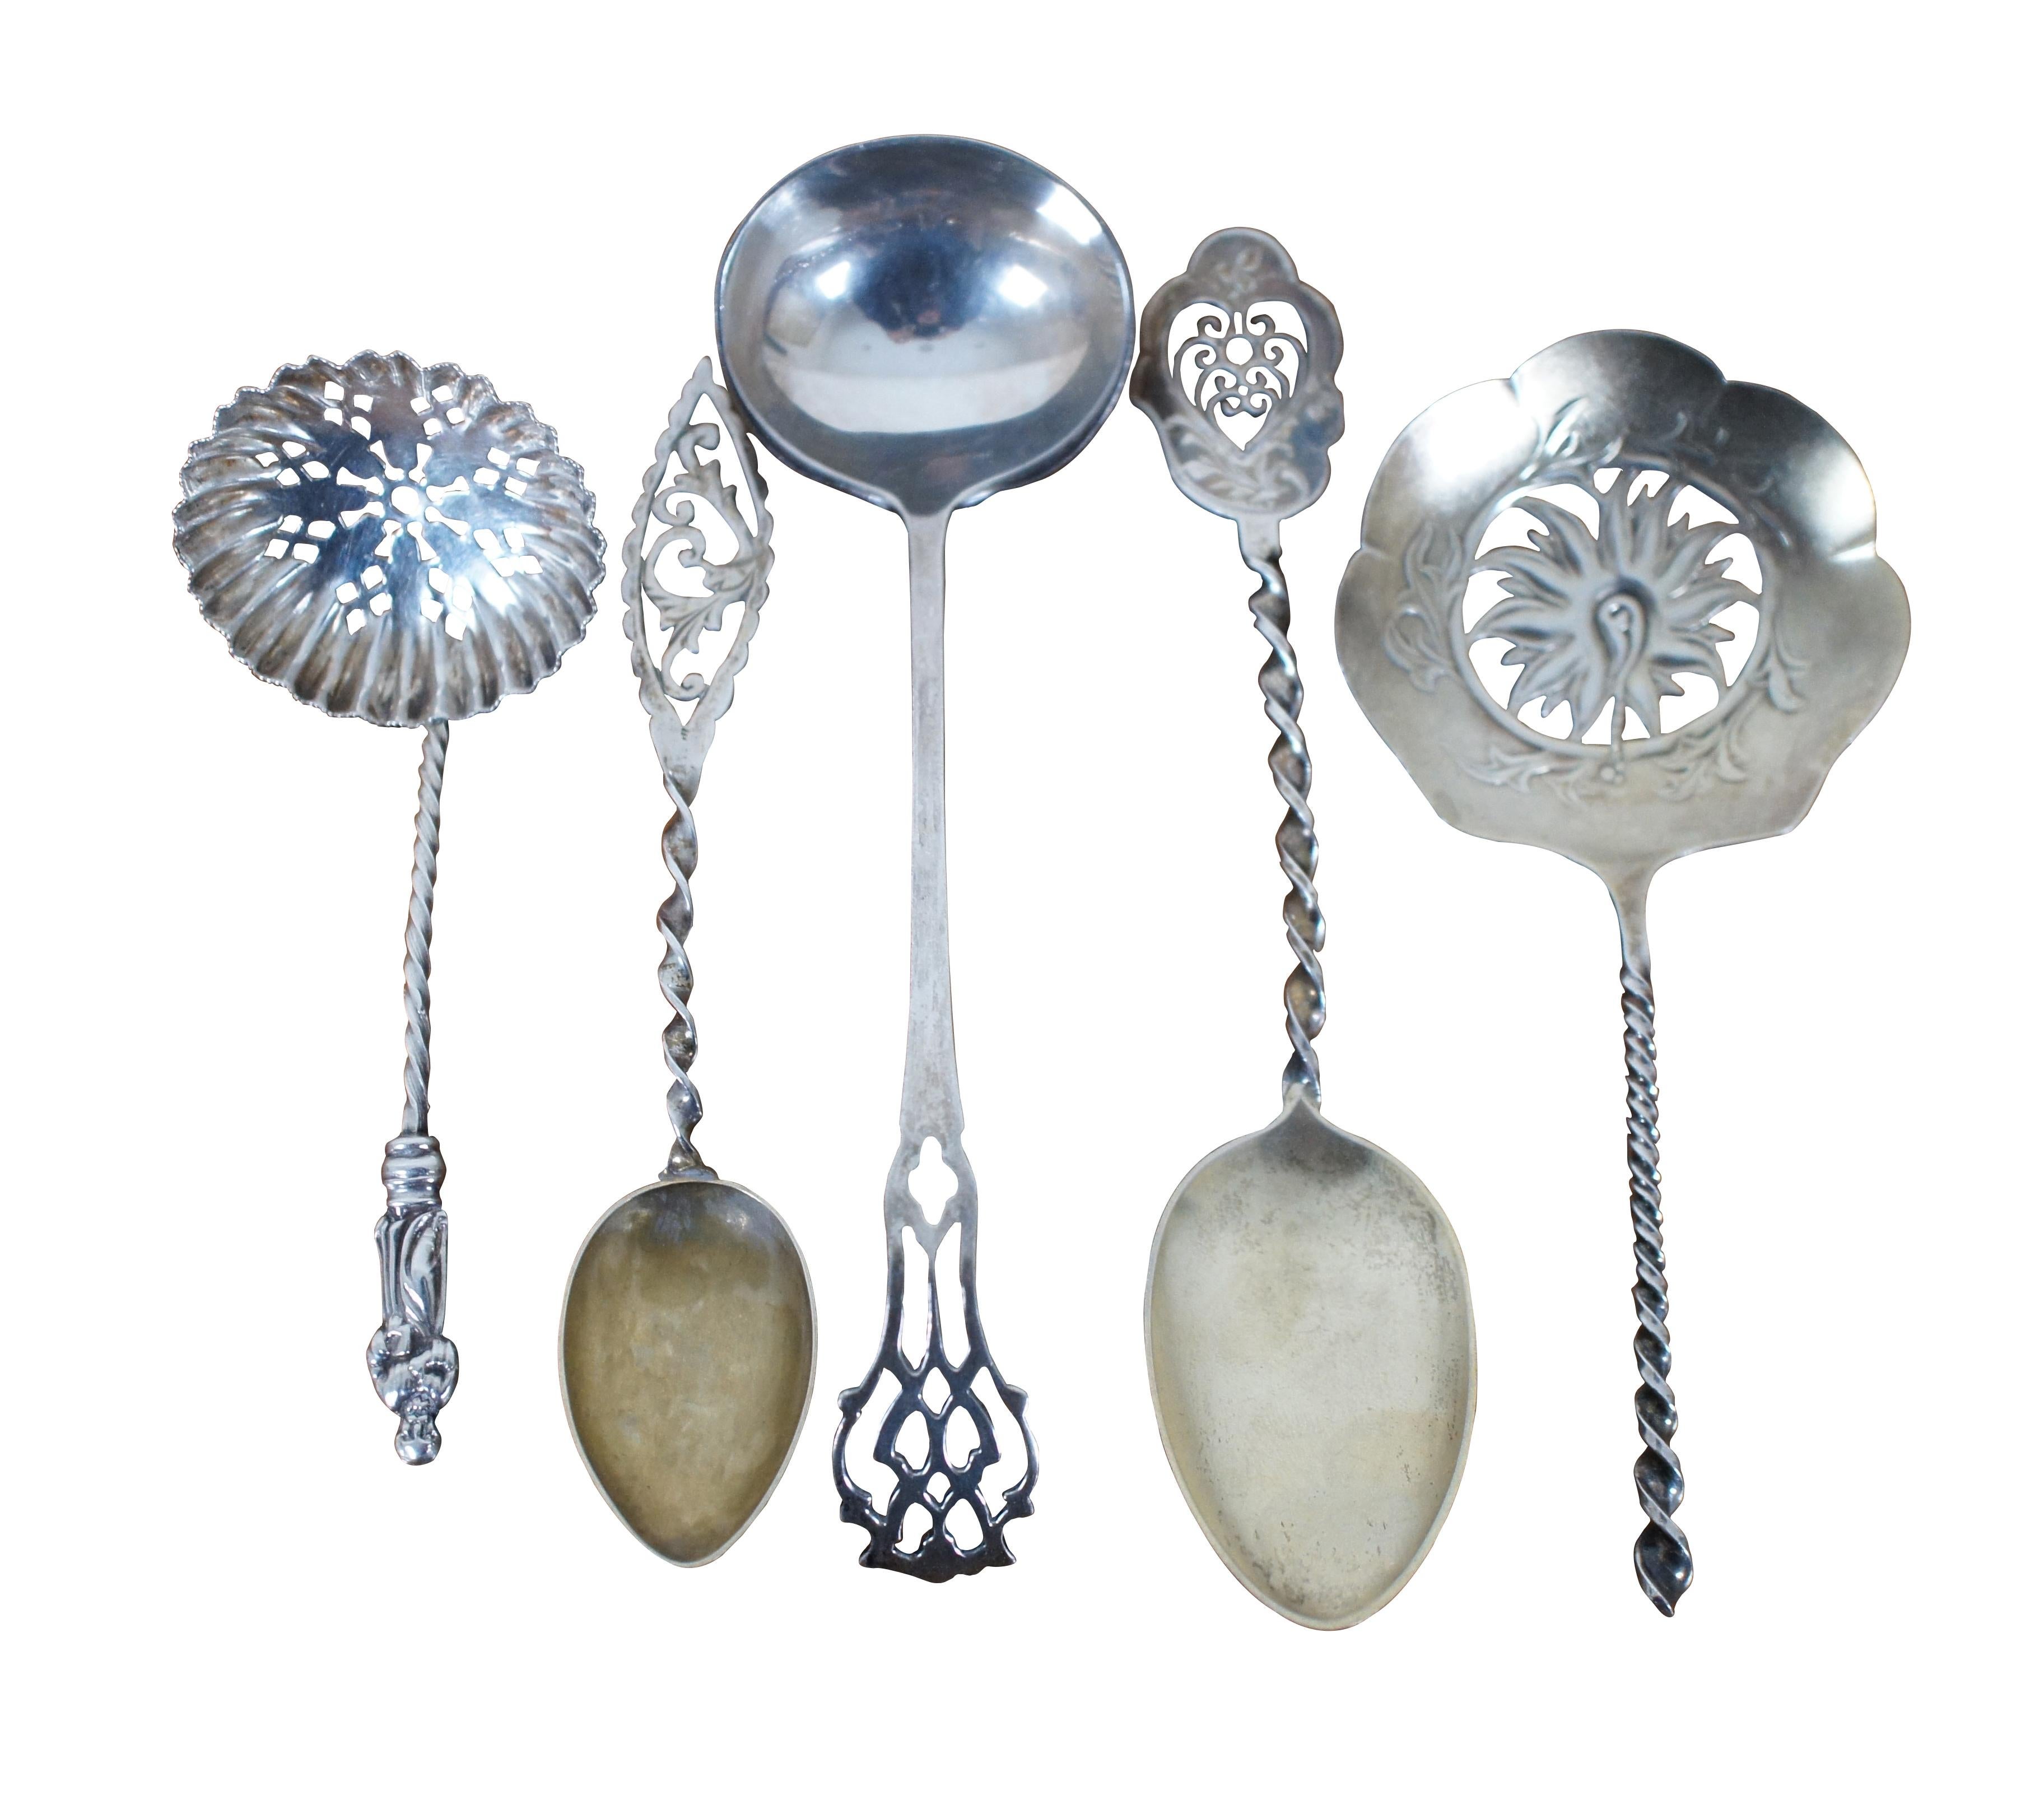 Lot of five sterling silver spoons with a variety of ornate twisted and reticulated handles, including two tea / coffee spoons, two pea / bon bon spoons, and one sauce ladle. Makers include Towle Silversmiths, Lunt Silversmiths, and William